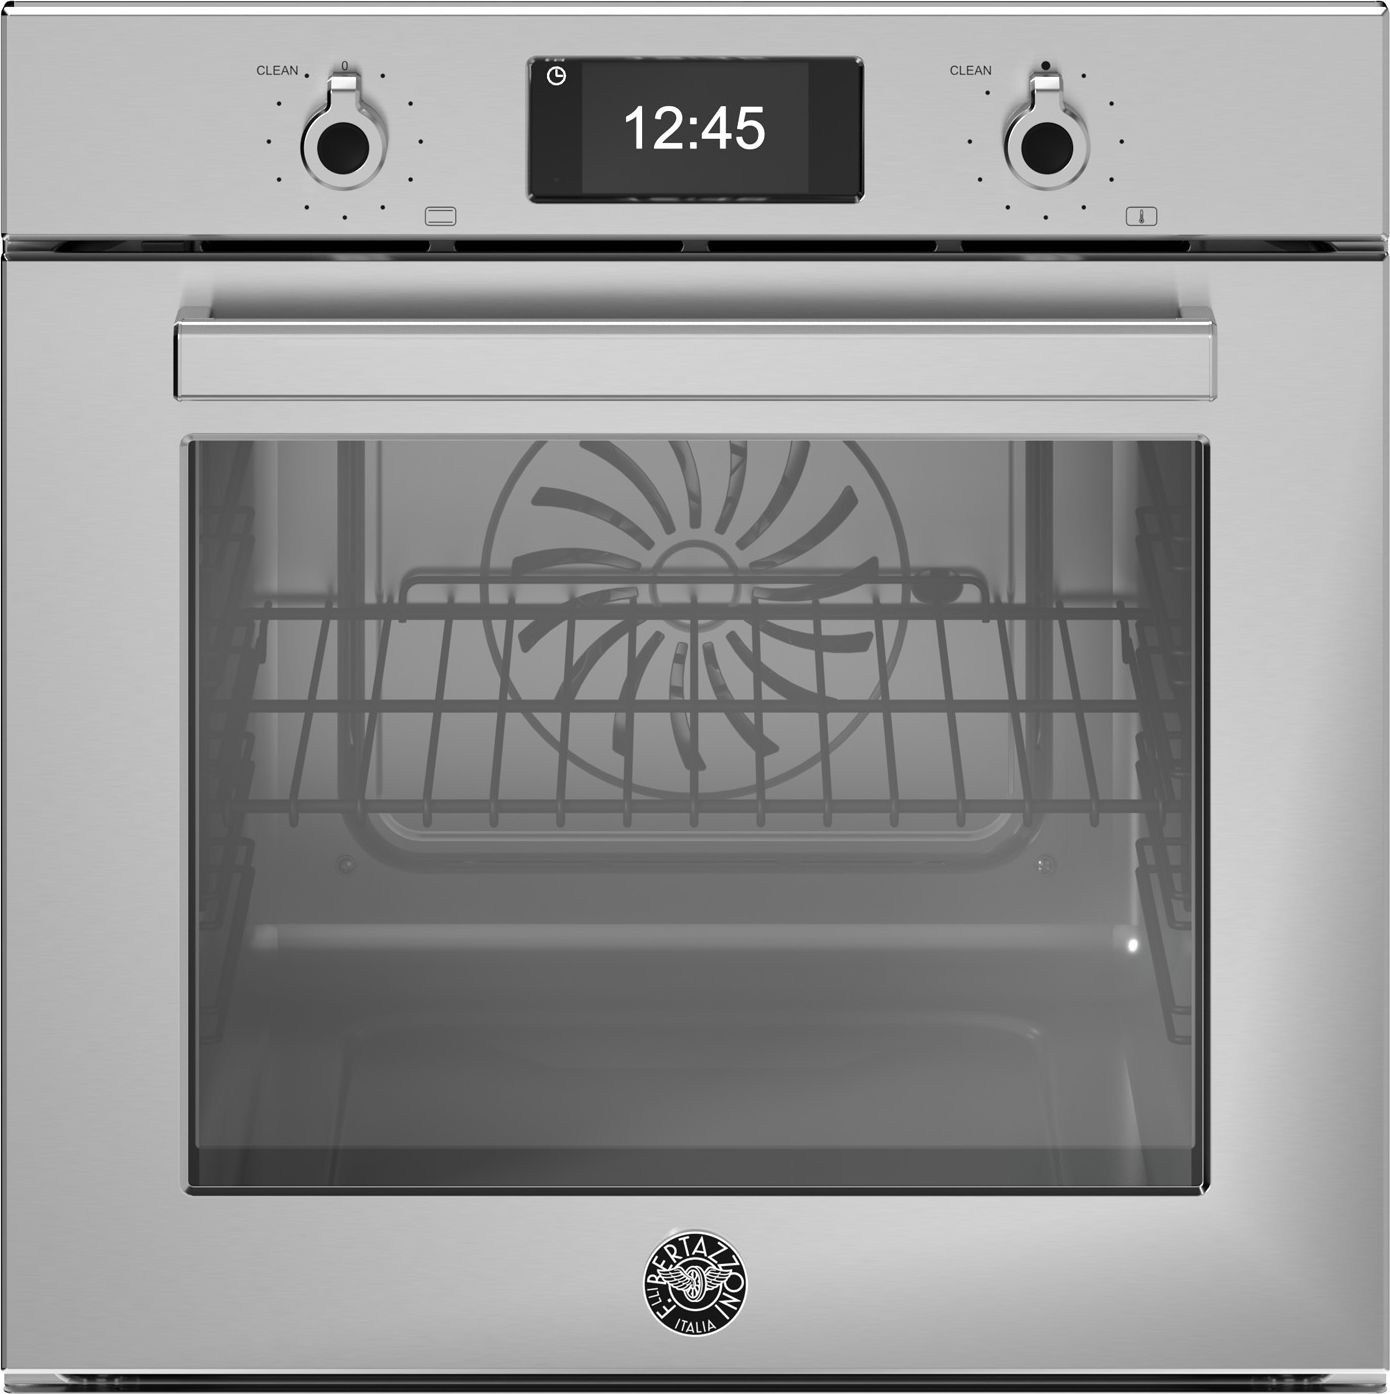 Bertazzoni Professional Series F6011PROPTX Built In Electric Single Oven with Pyrolytic Cleaning - Stainless Steel - A++ Rated, Stainless Steel